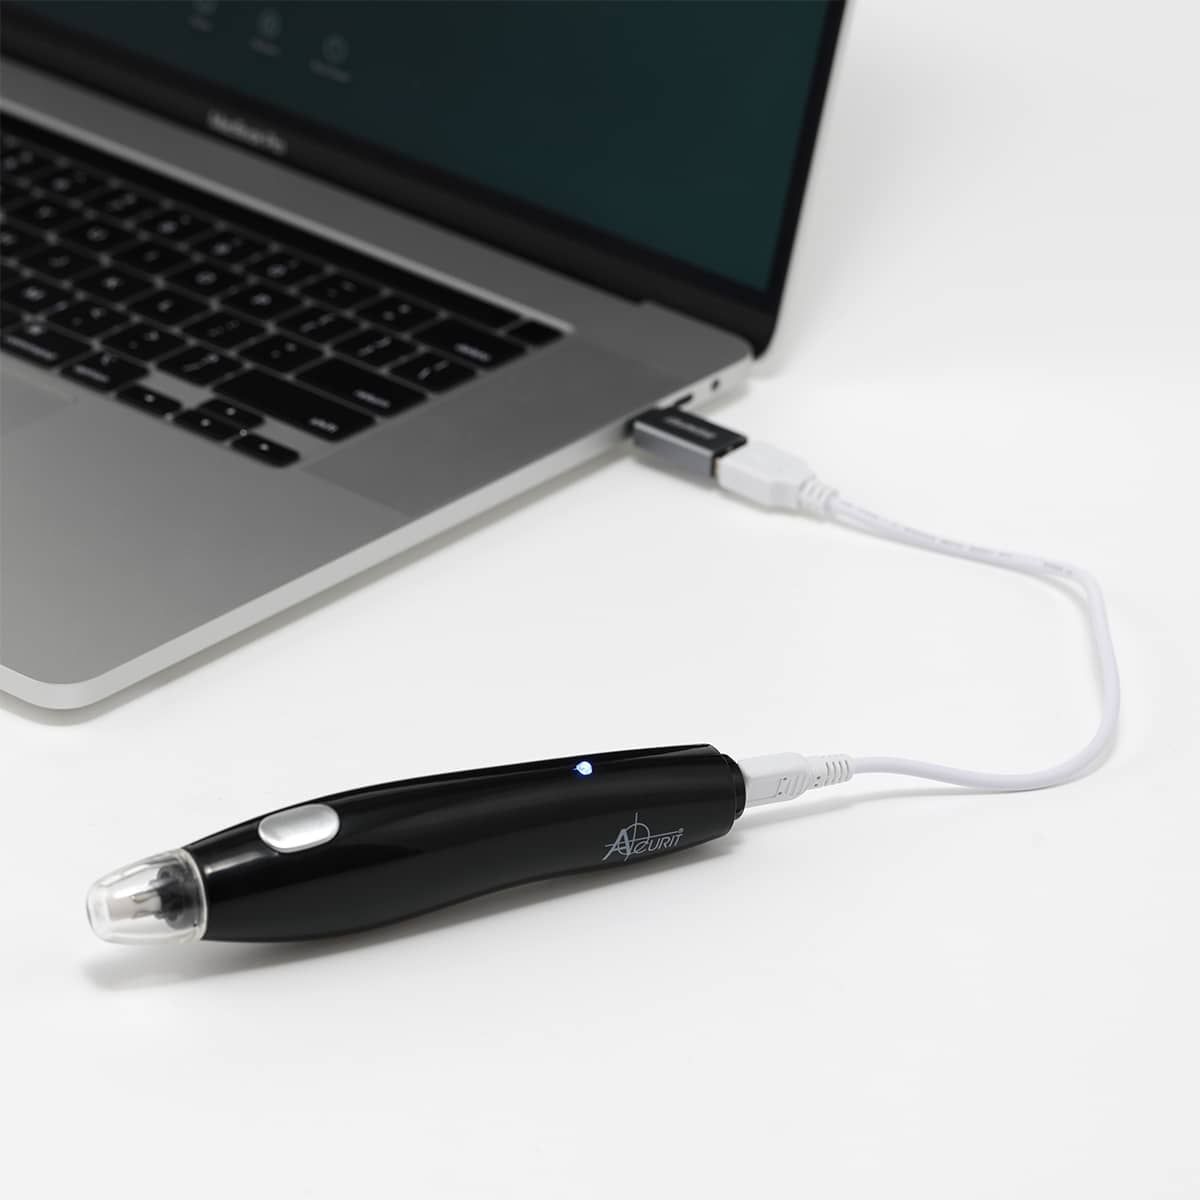 Recharge the electric eraser with any available usb port